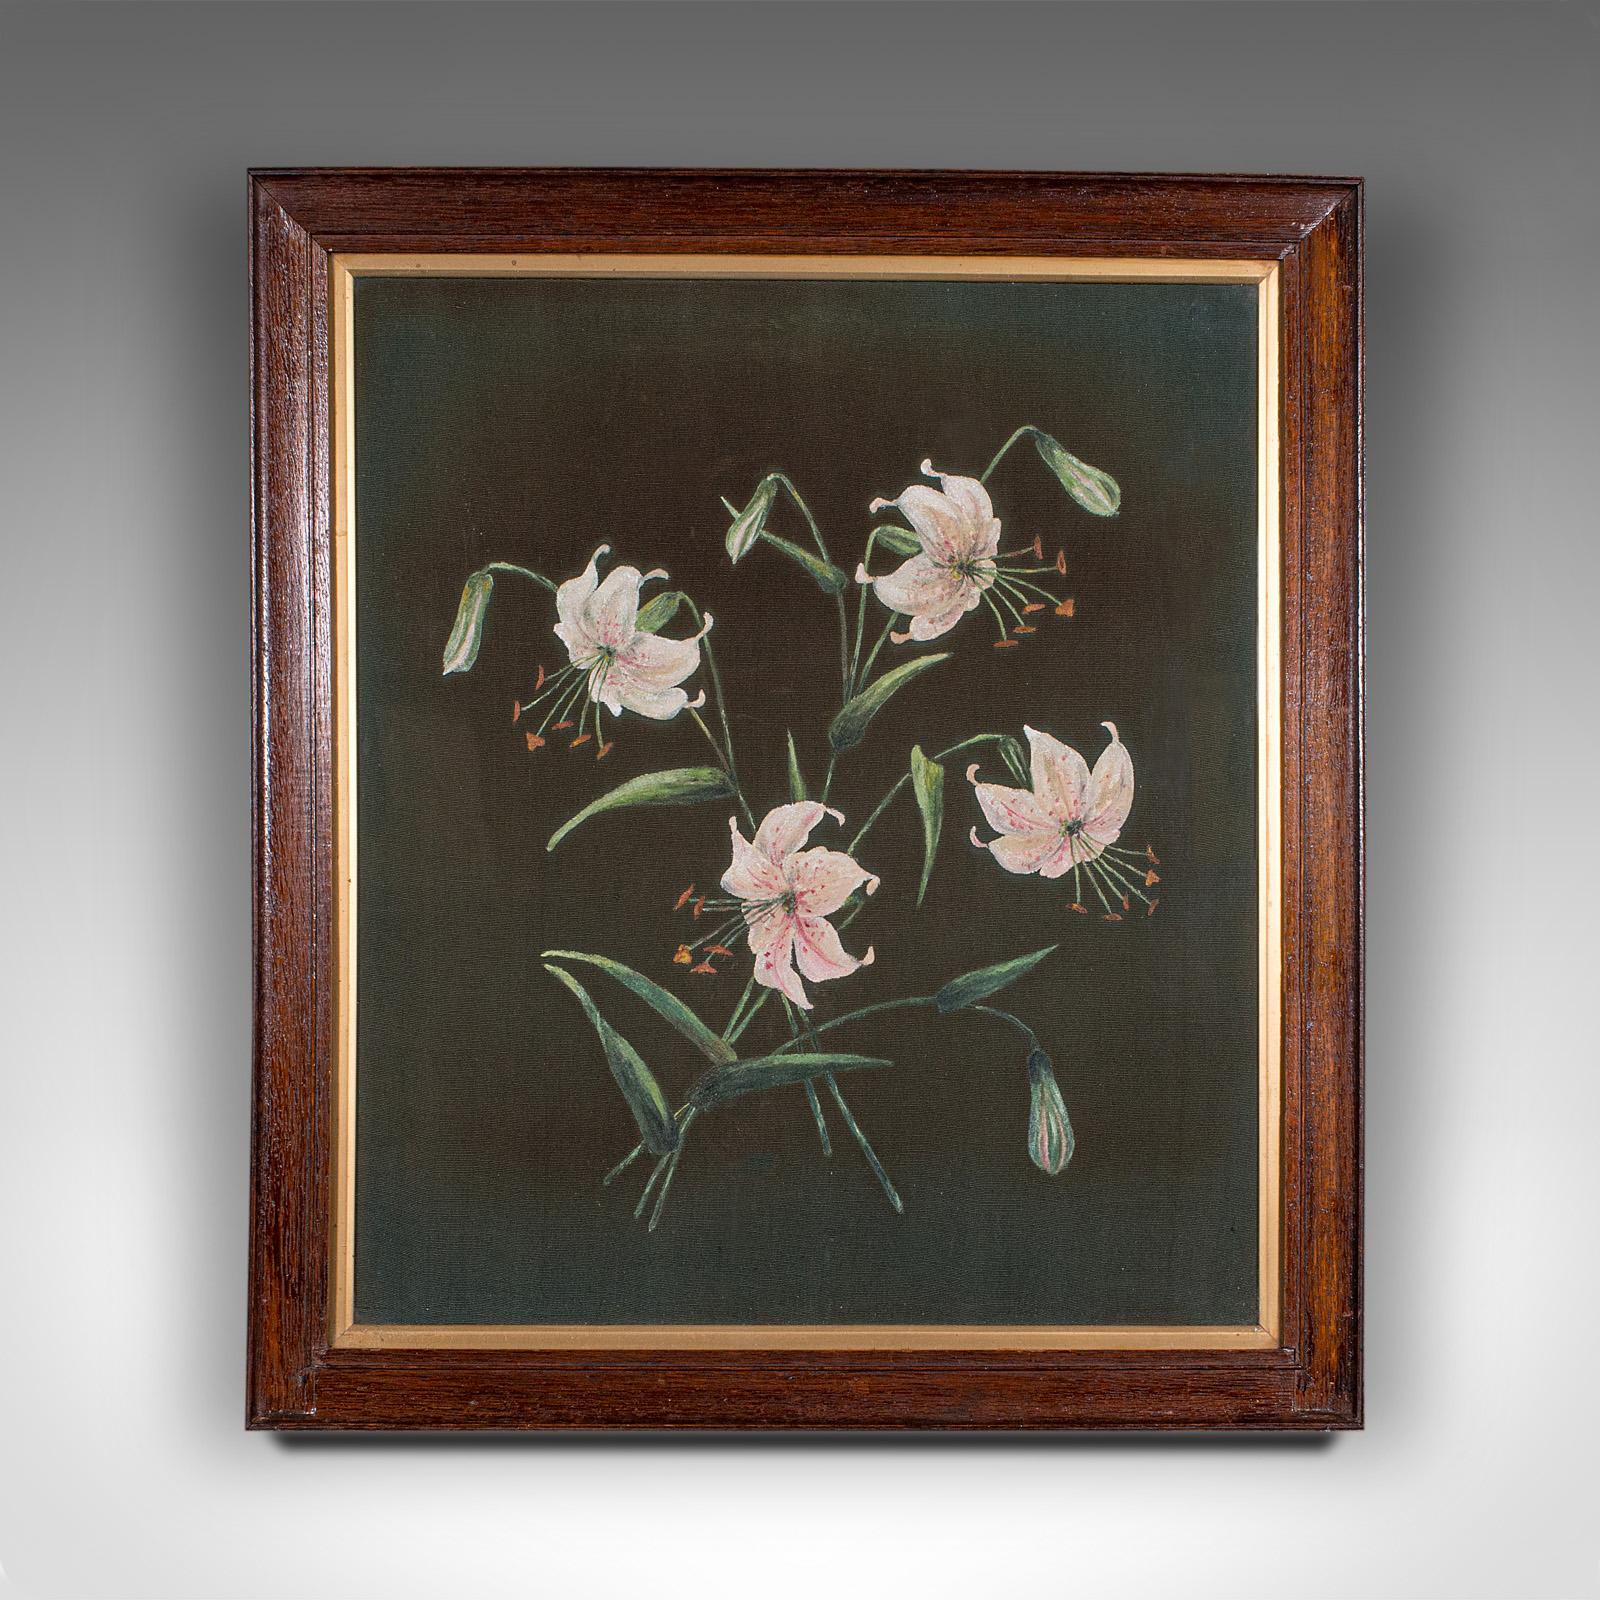 This is an antique framed panel. An English, hand-painted cotton screen, dating to the Edwardian period, circa 1910.

Elegantly presented example of Edwardian decorative arts
Displays a desirable aged patina
Dark mallard green cotton panel, hand